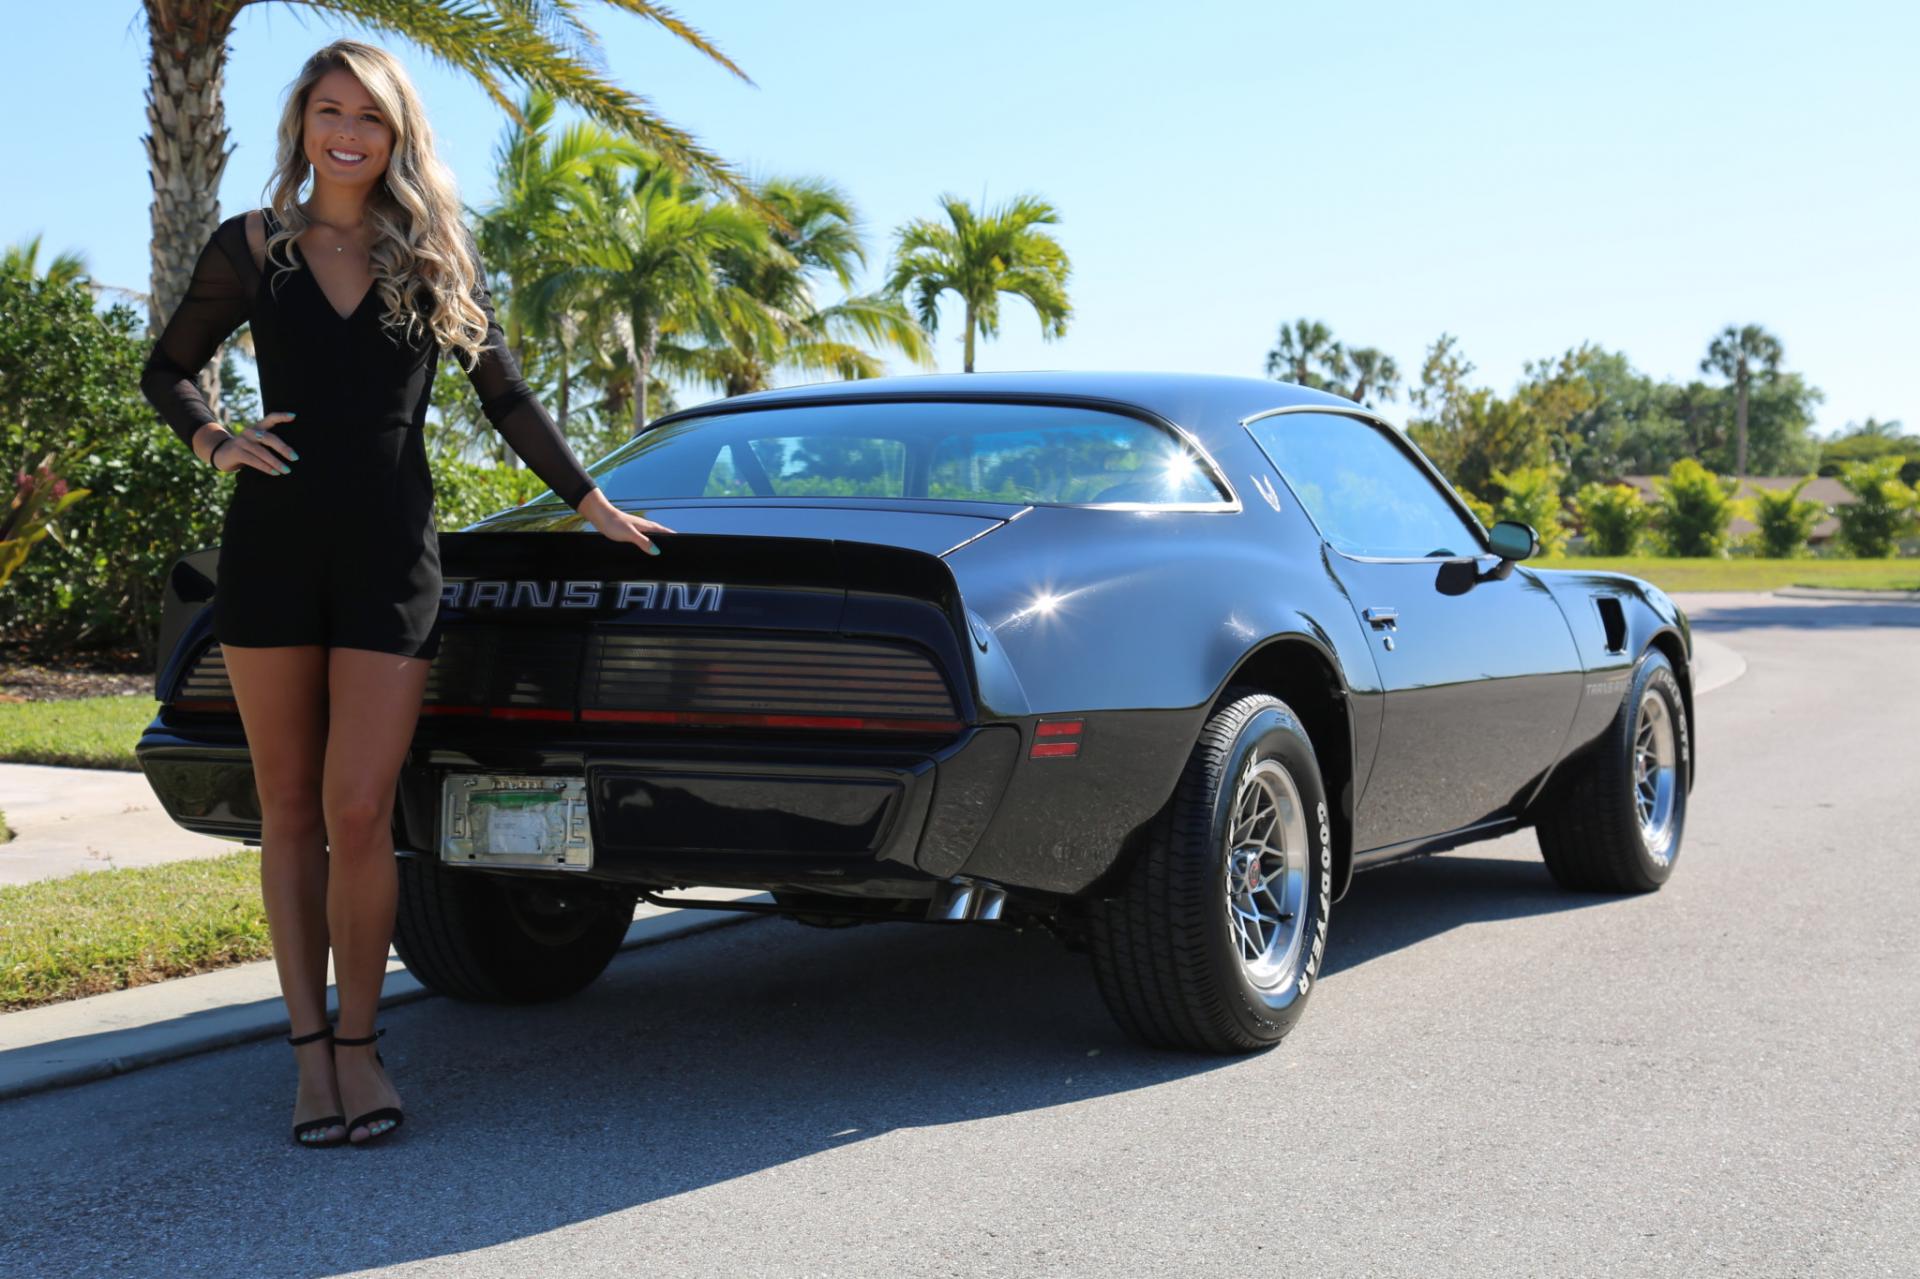 Used 1980 Pontiac Trans Am for sale Sold at Muscle Cars for Sale Inc. in Fort Myers FL 33912 4